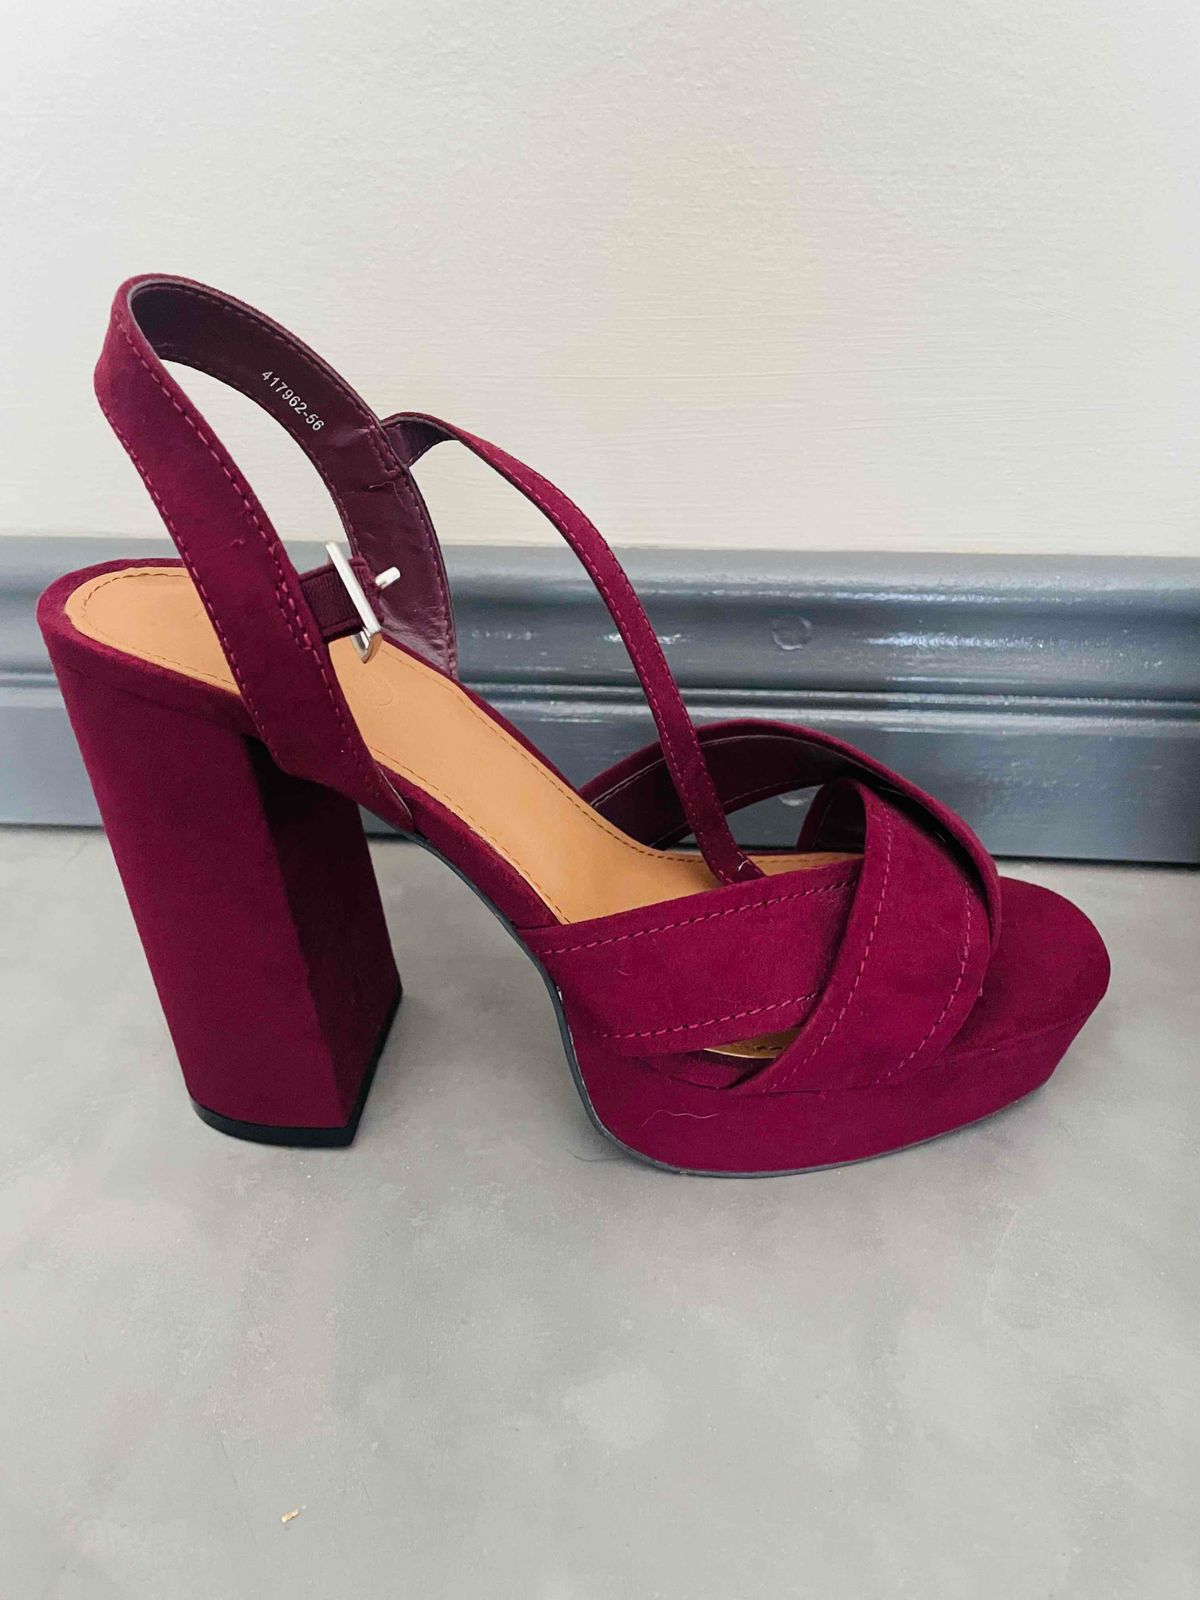 Solo Shoes - These sexy Plum heels are now available at a... | Facebook